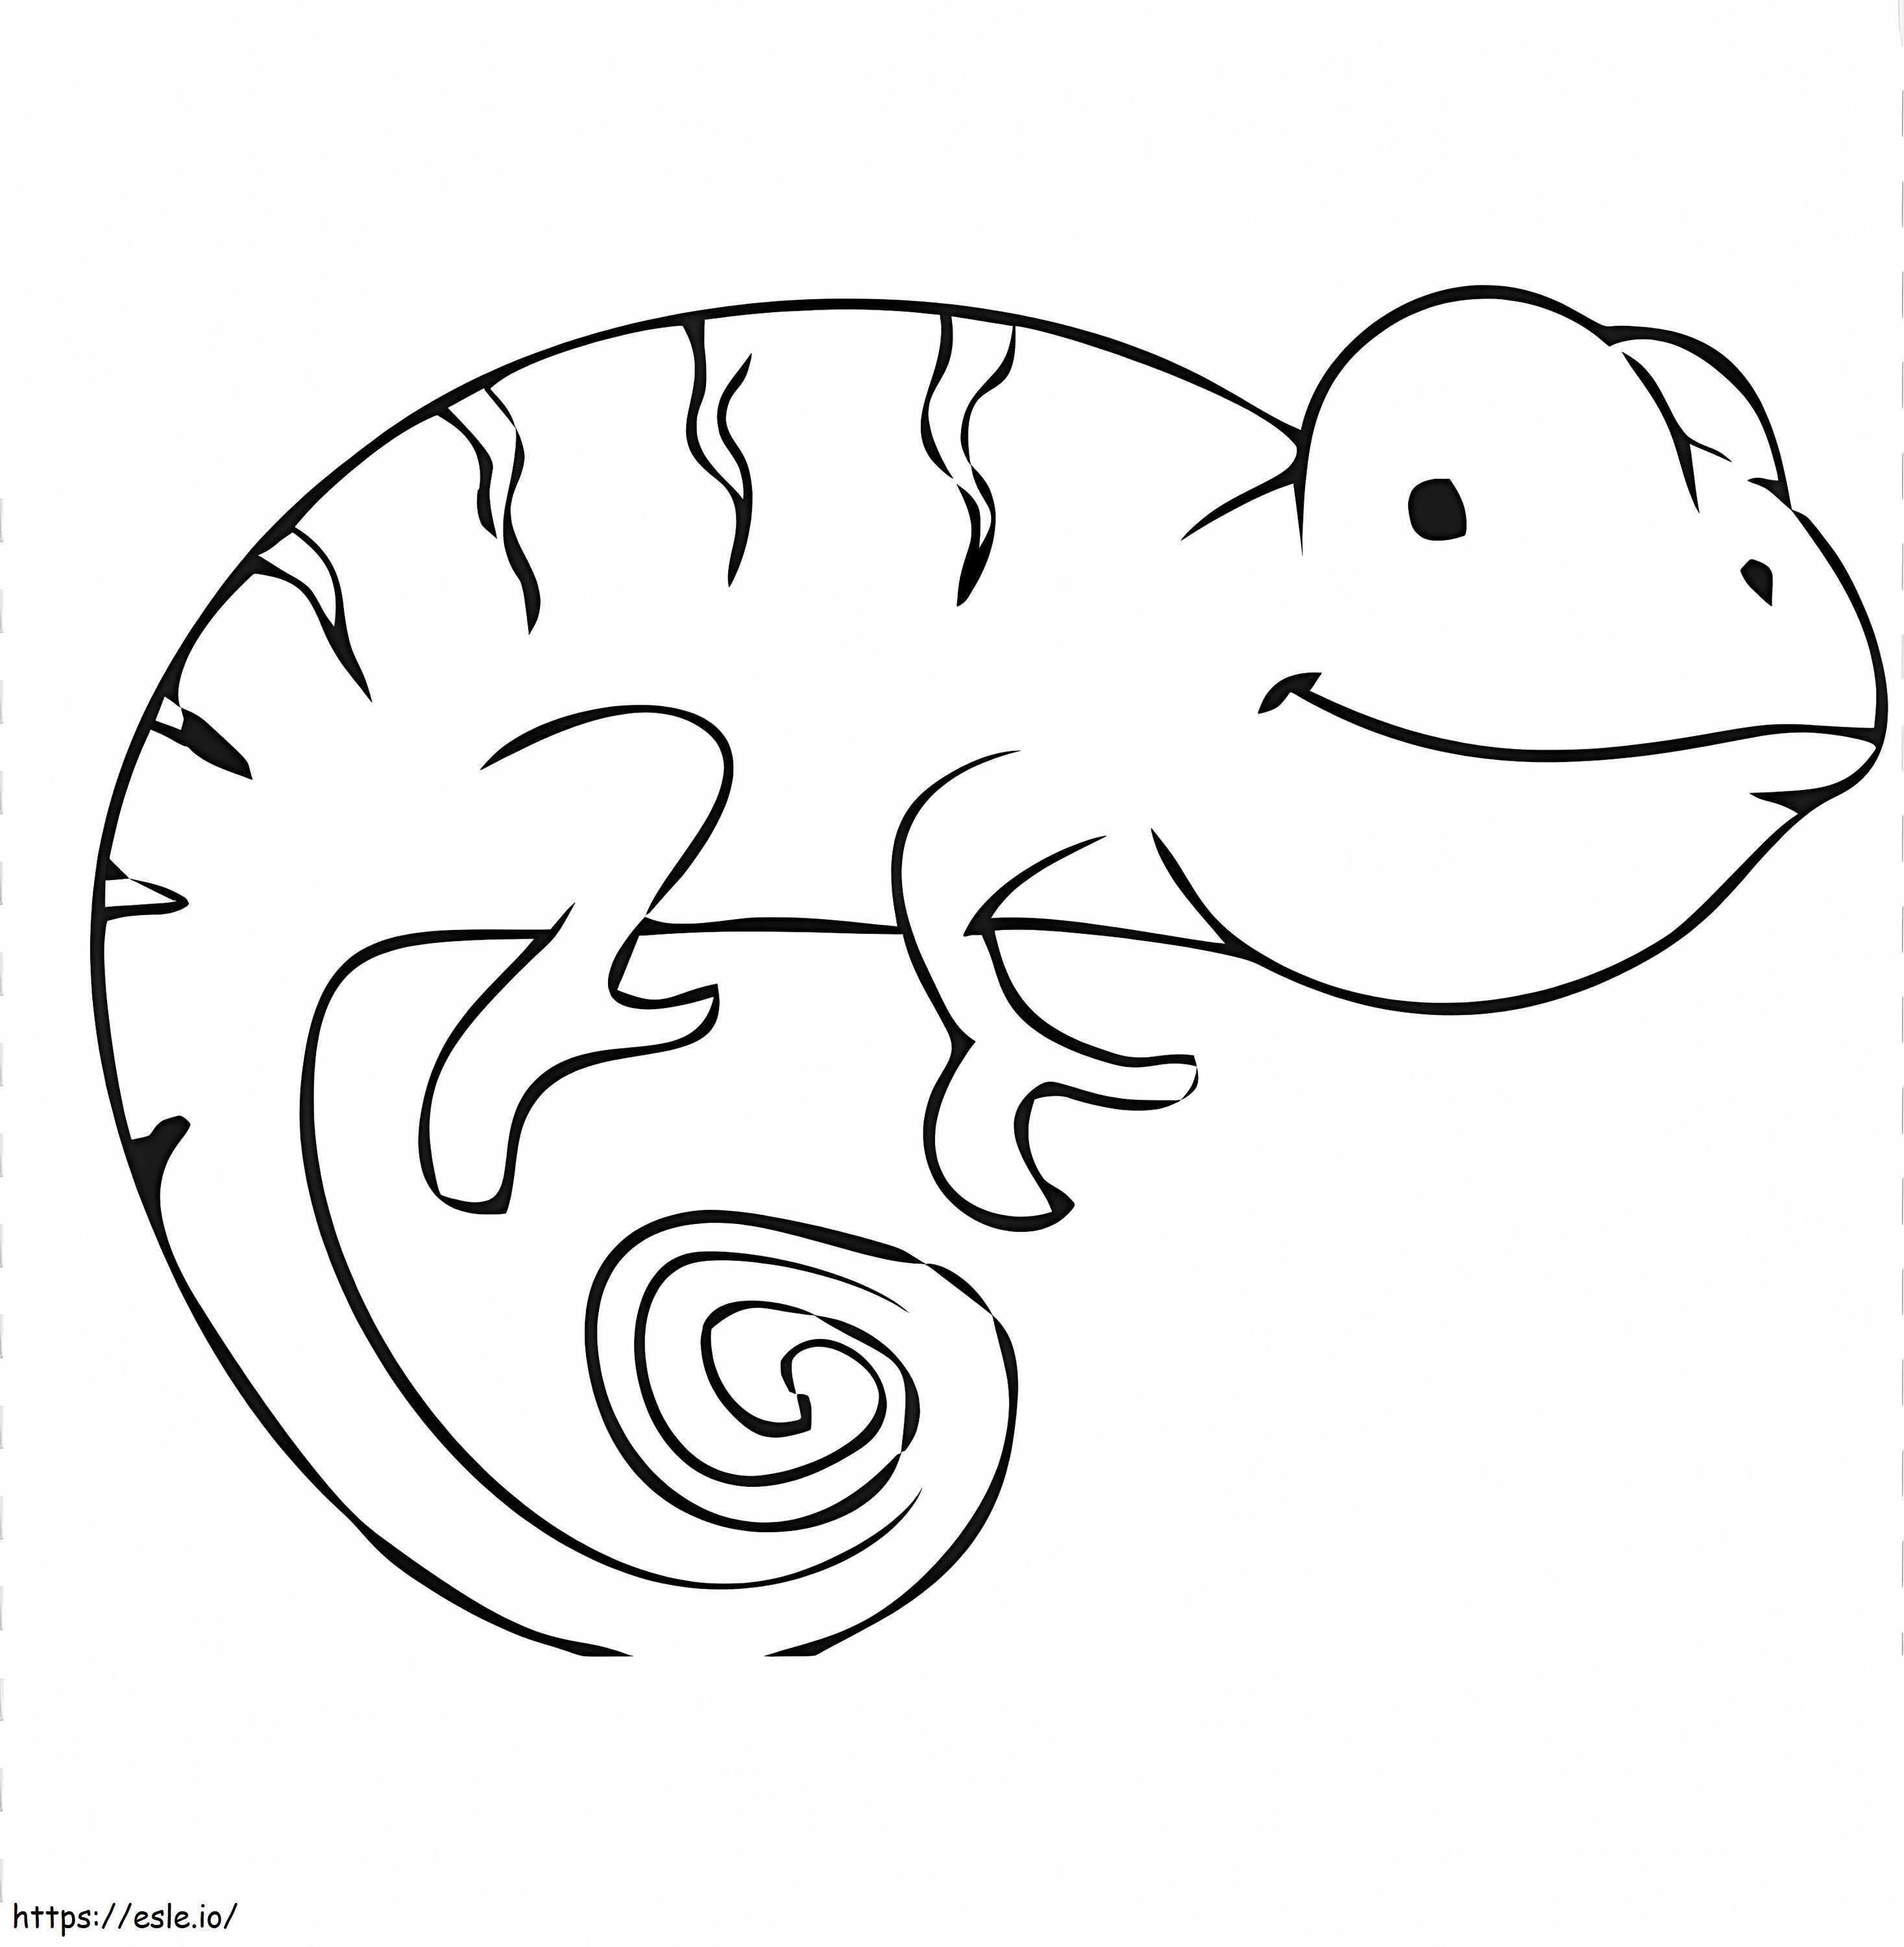 Stupid Chameleon coloring page